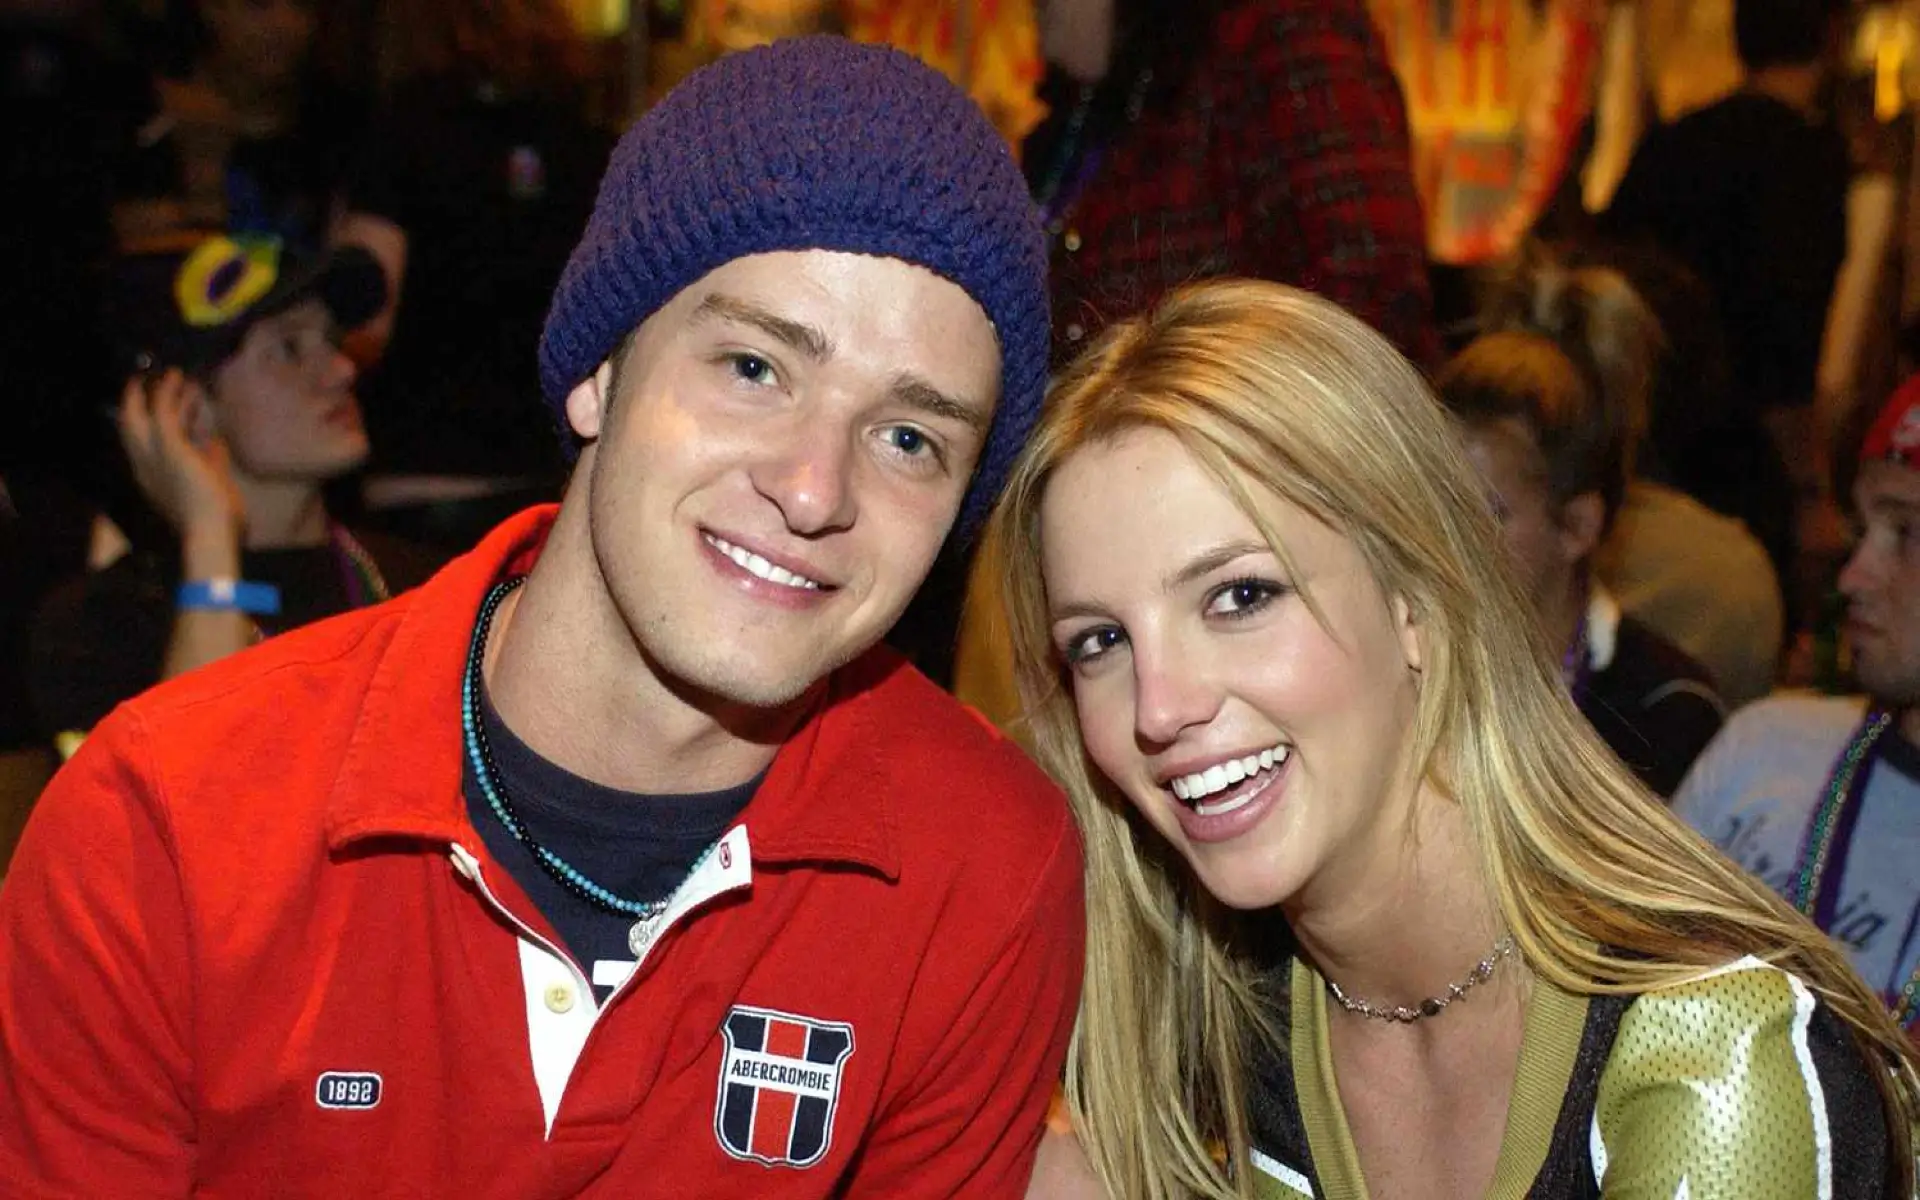 Britney Spears Apology and Praise for Justin Timberlake’s New Music